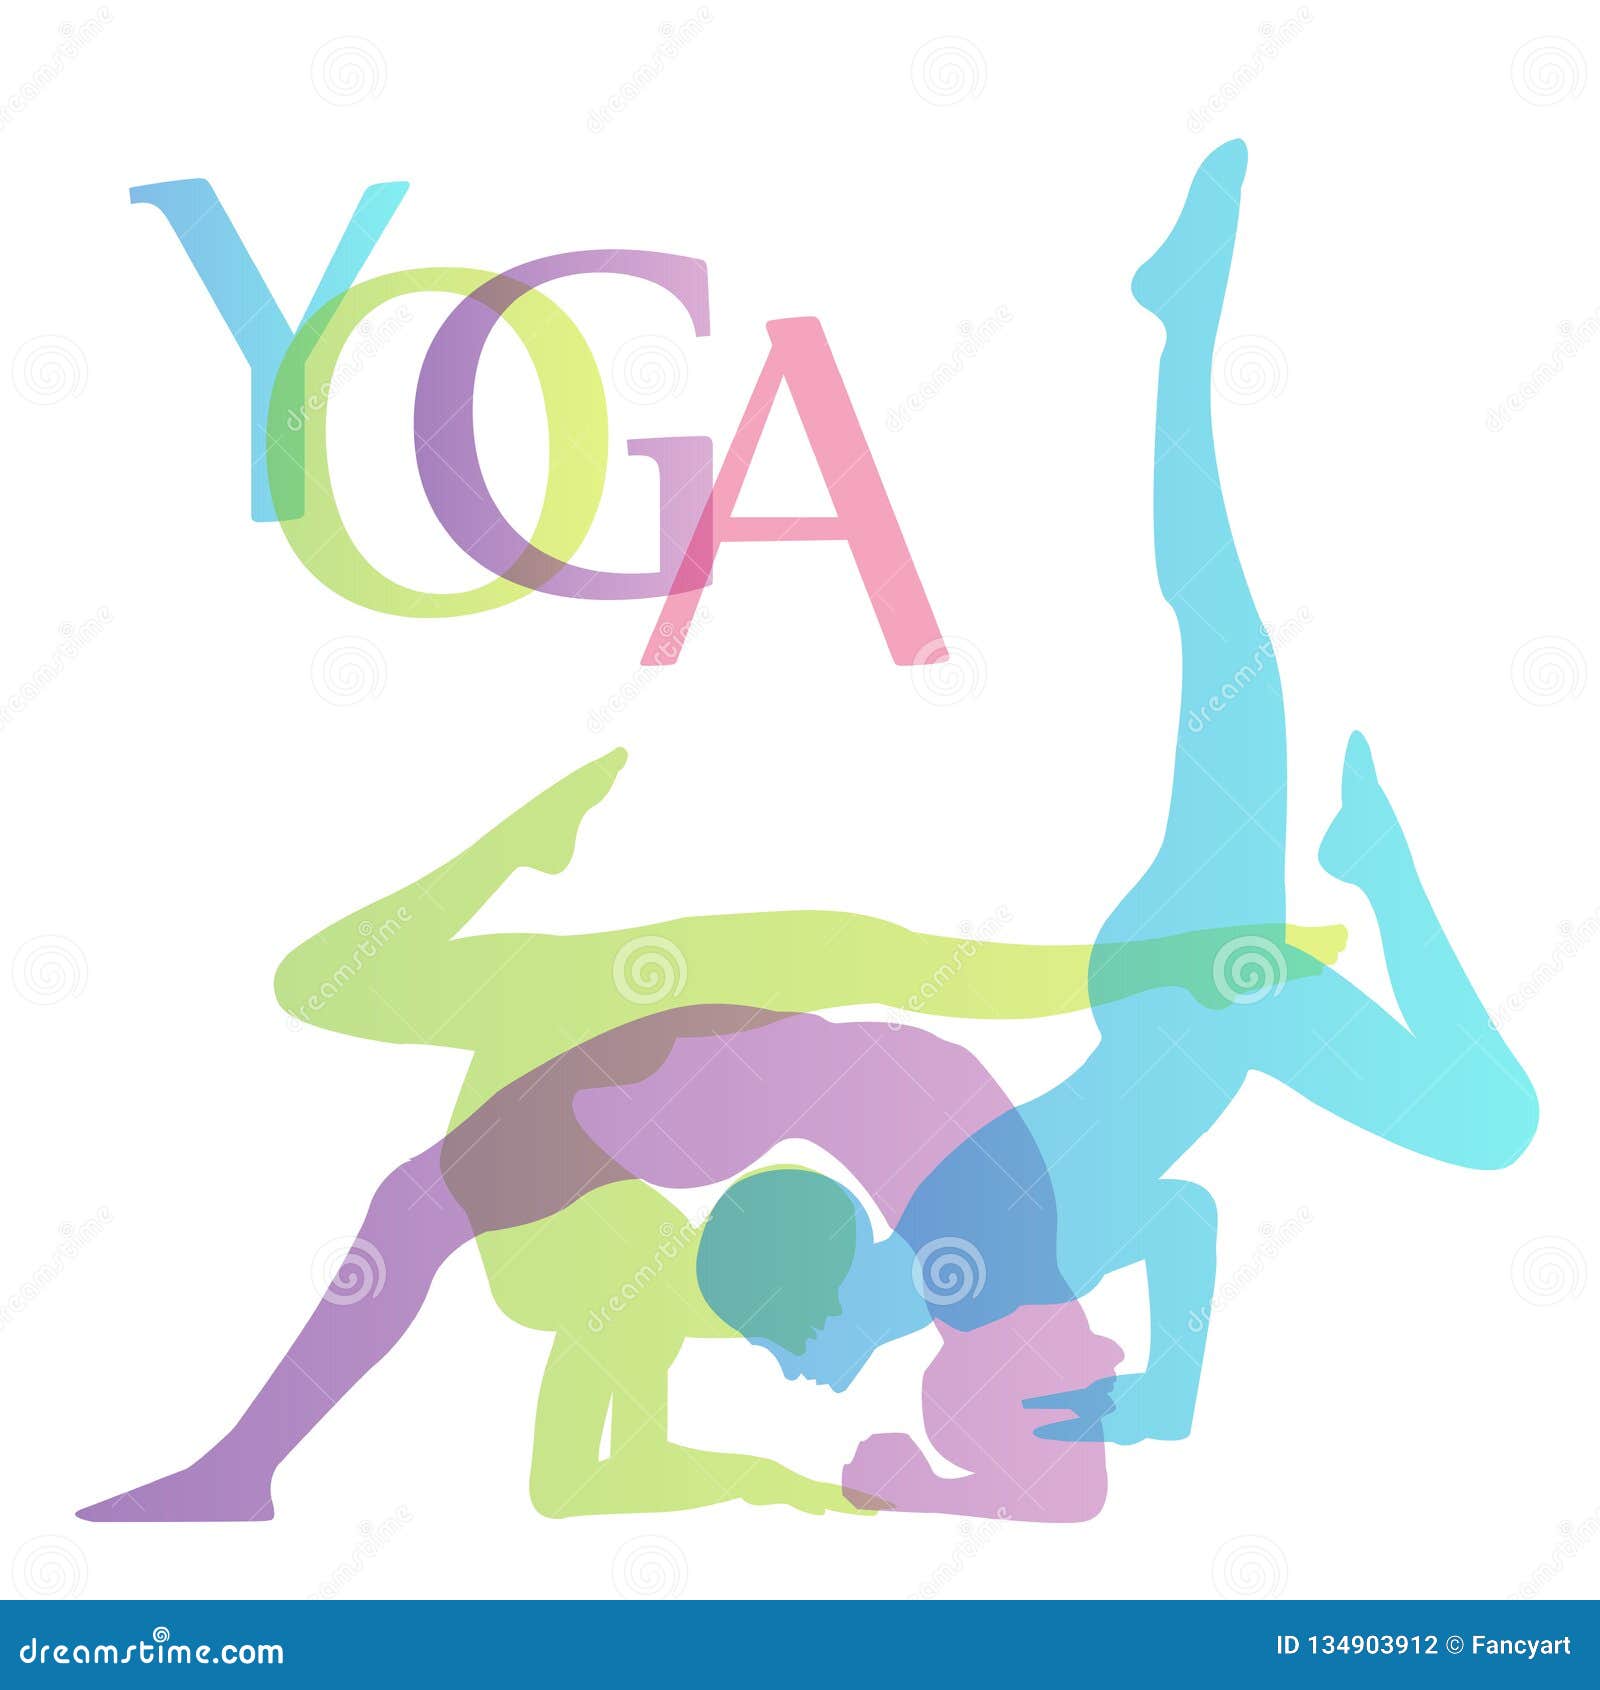 Yoga Pose Vector Graphic, Yoga Pose, Yoga Poses, Yoga Poses Clipart PNG and  Vector with Transparent Background for Free Download